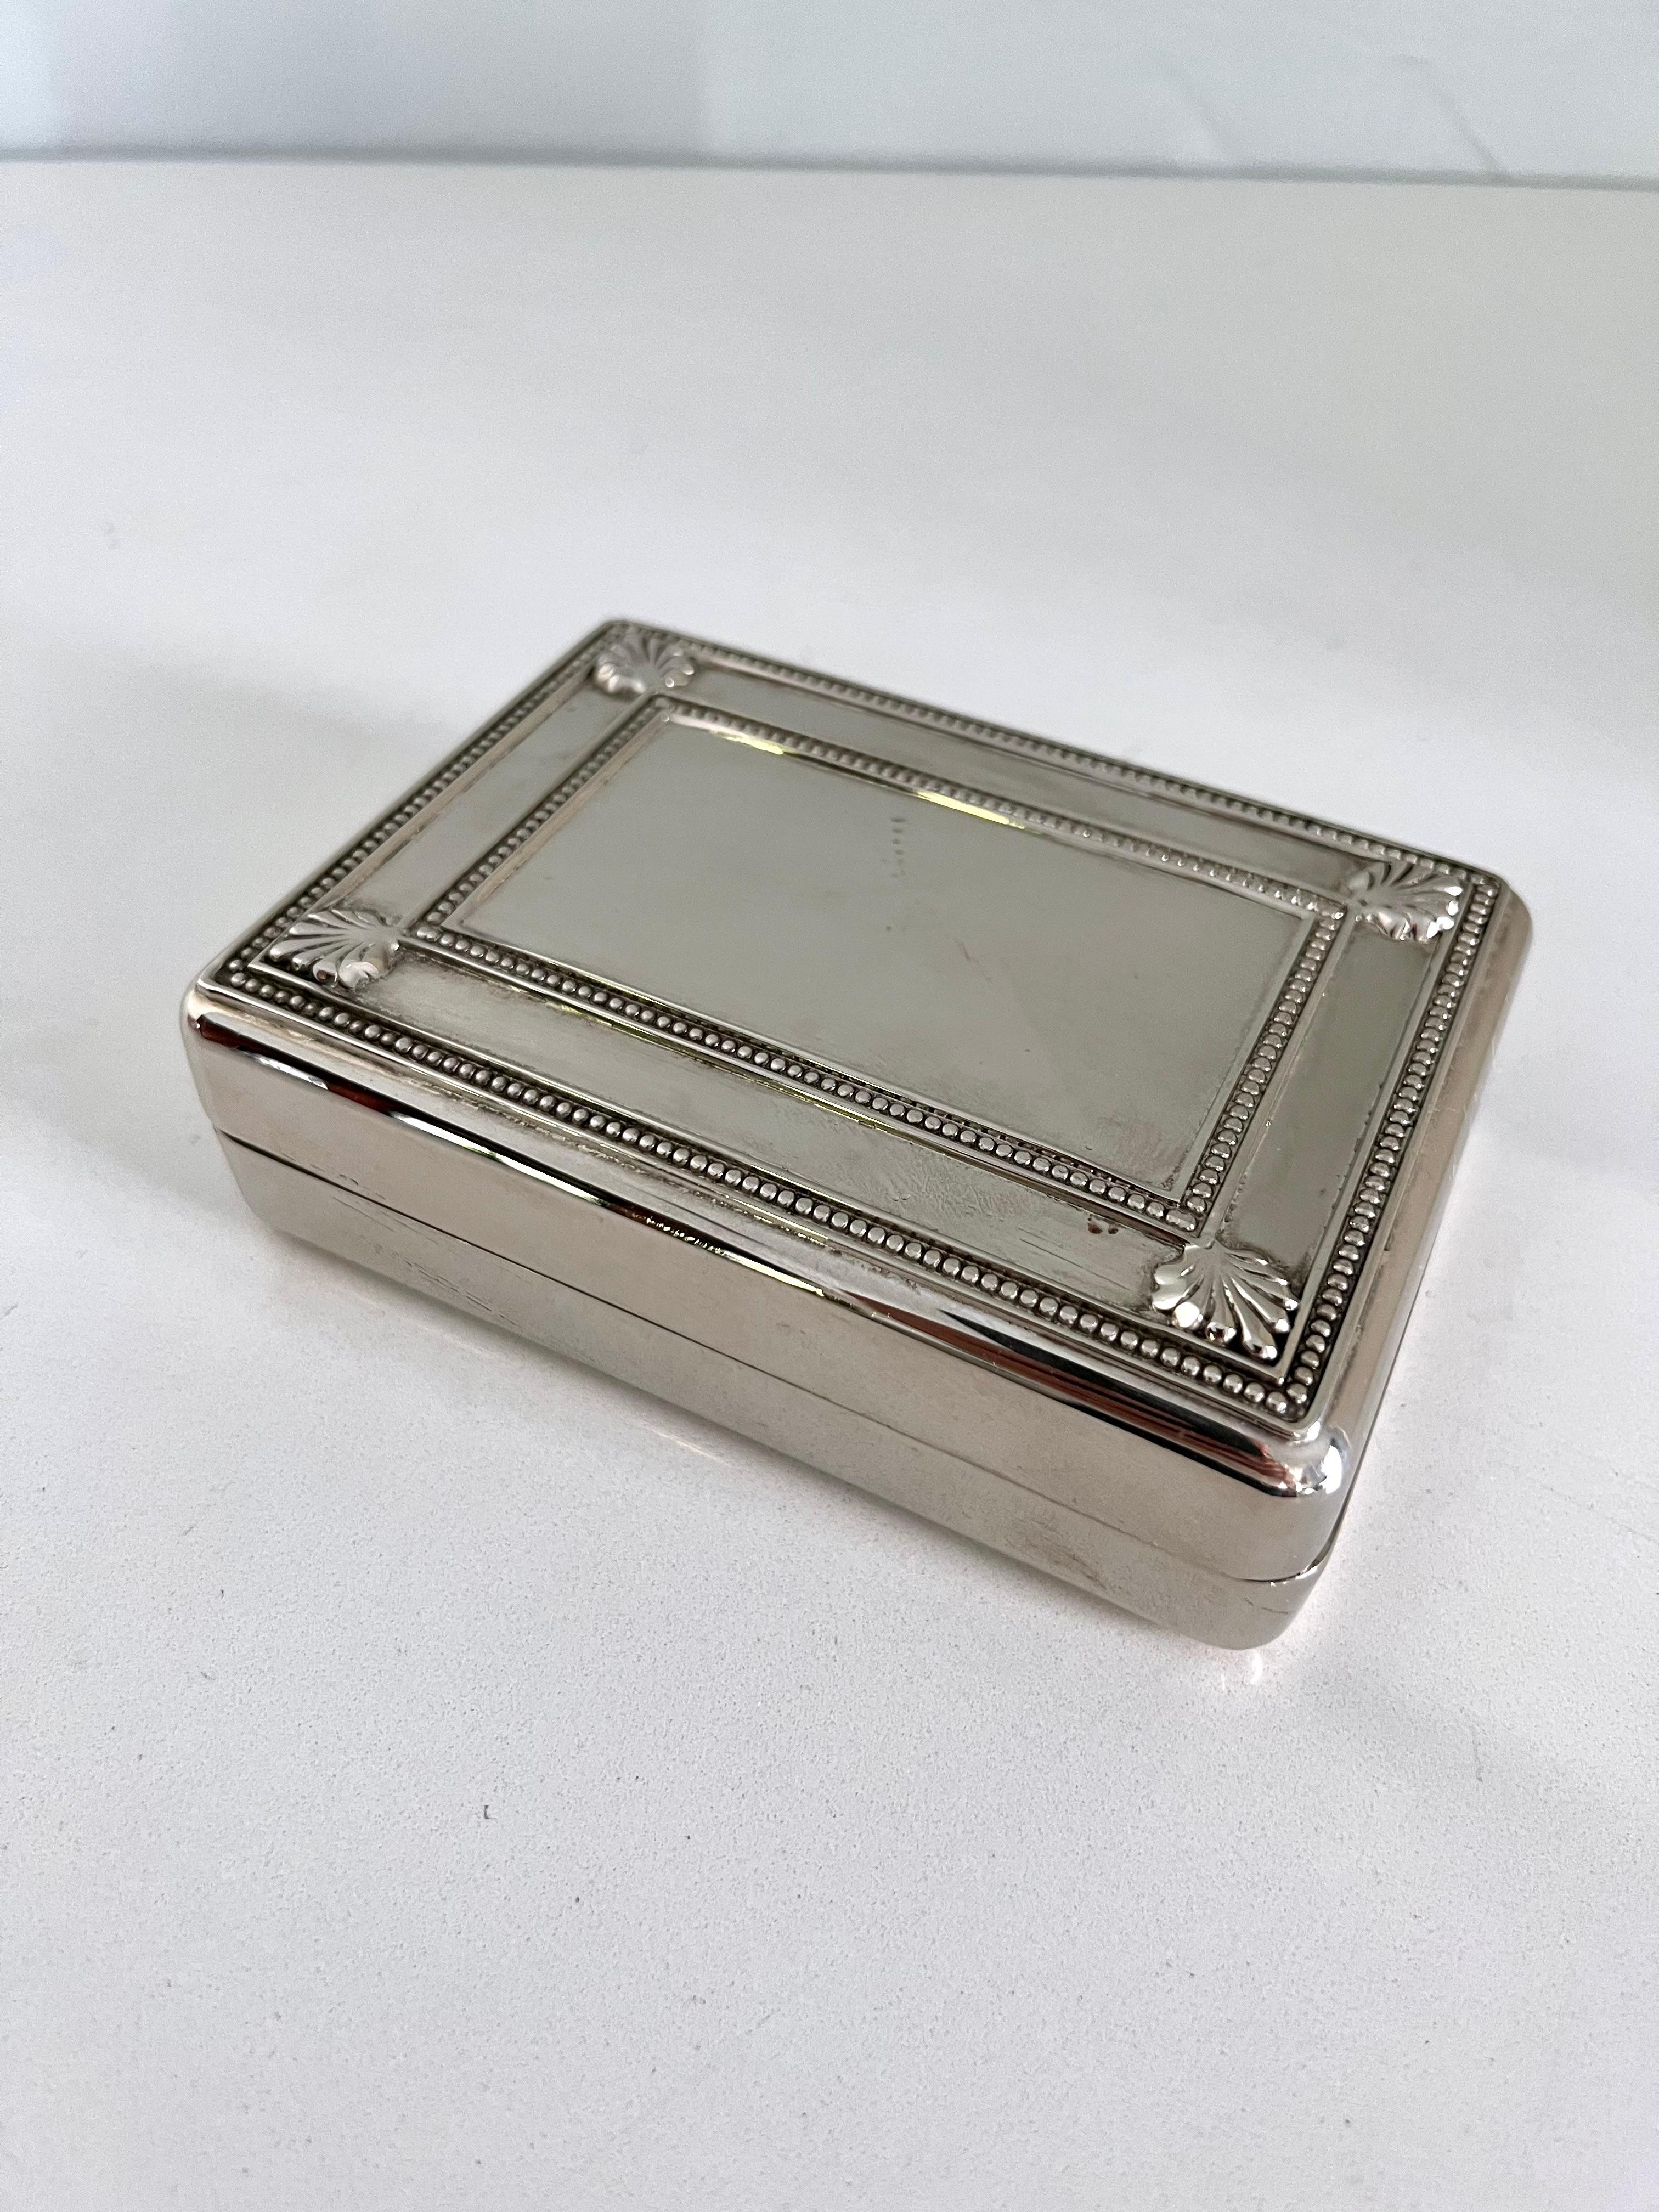 Superb silver box with velvet lining and a nice weight to it. A large rectangle perfect for engraving on the top. Box opens and closes easily. 

This box is compliment to any table or vanity, ideal for jewelry thanks to the soft lining. Can be